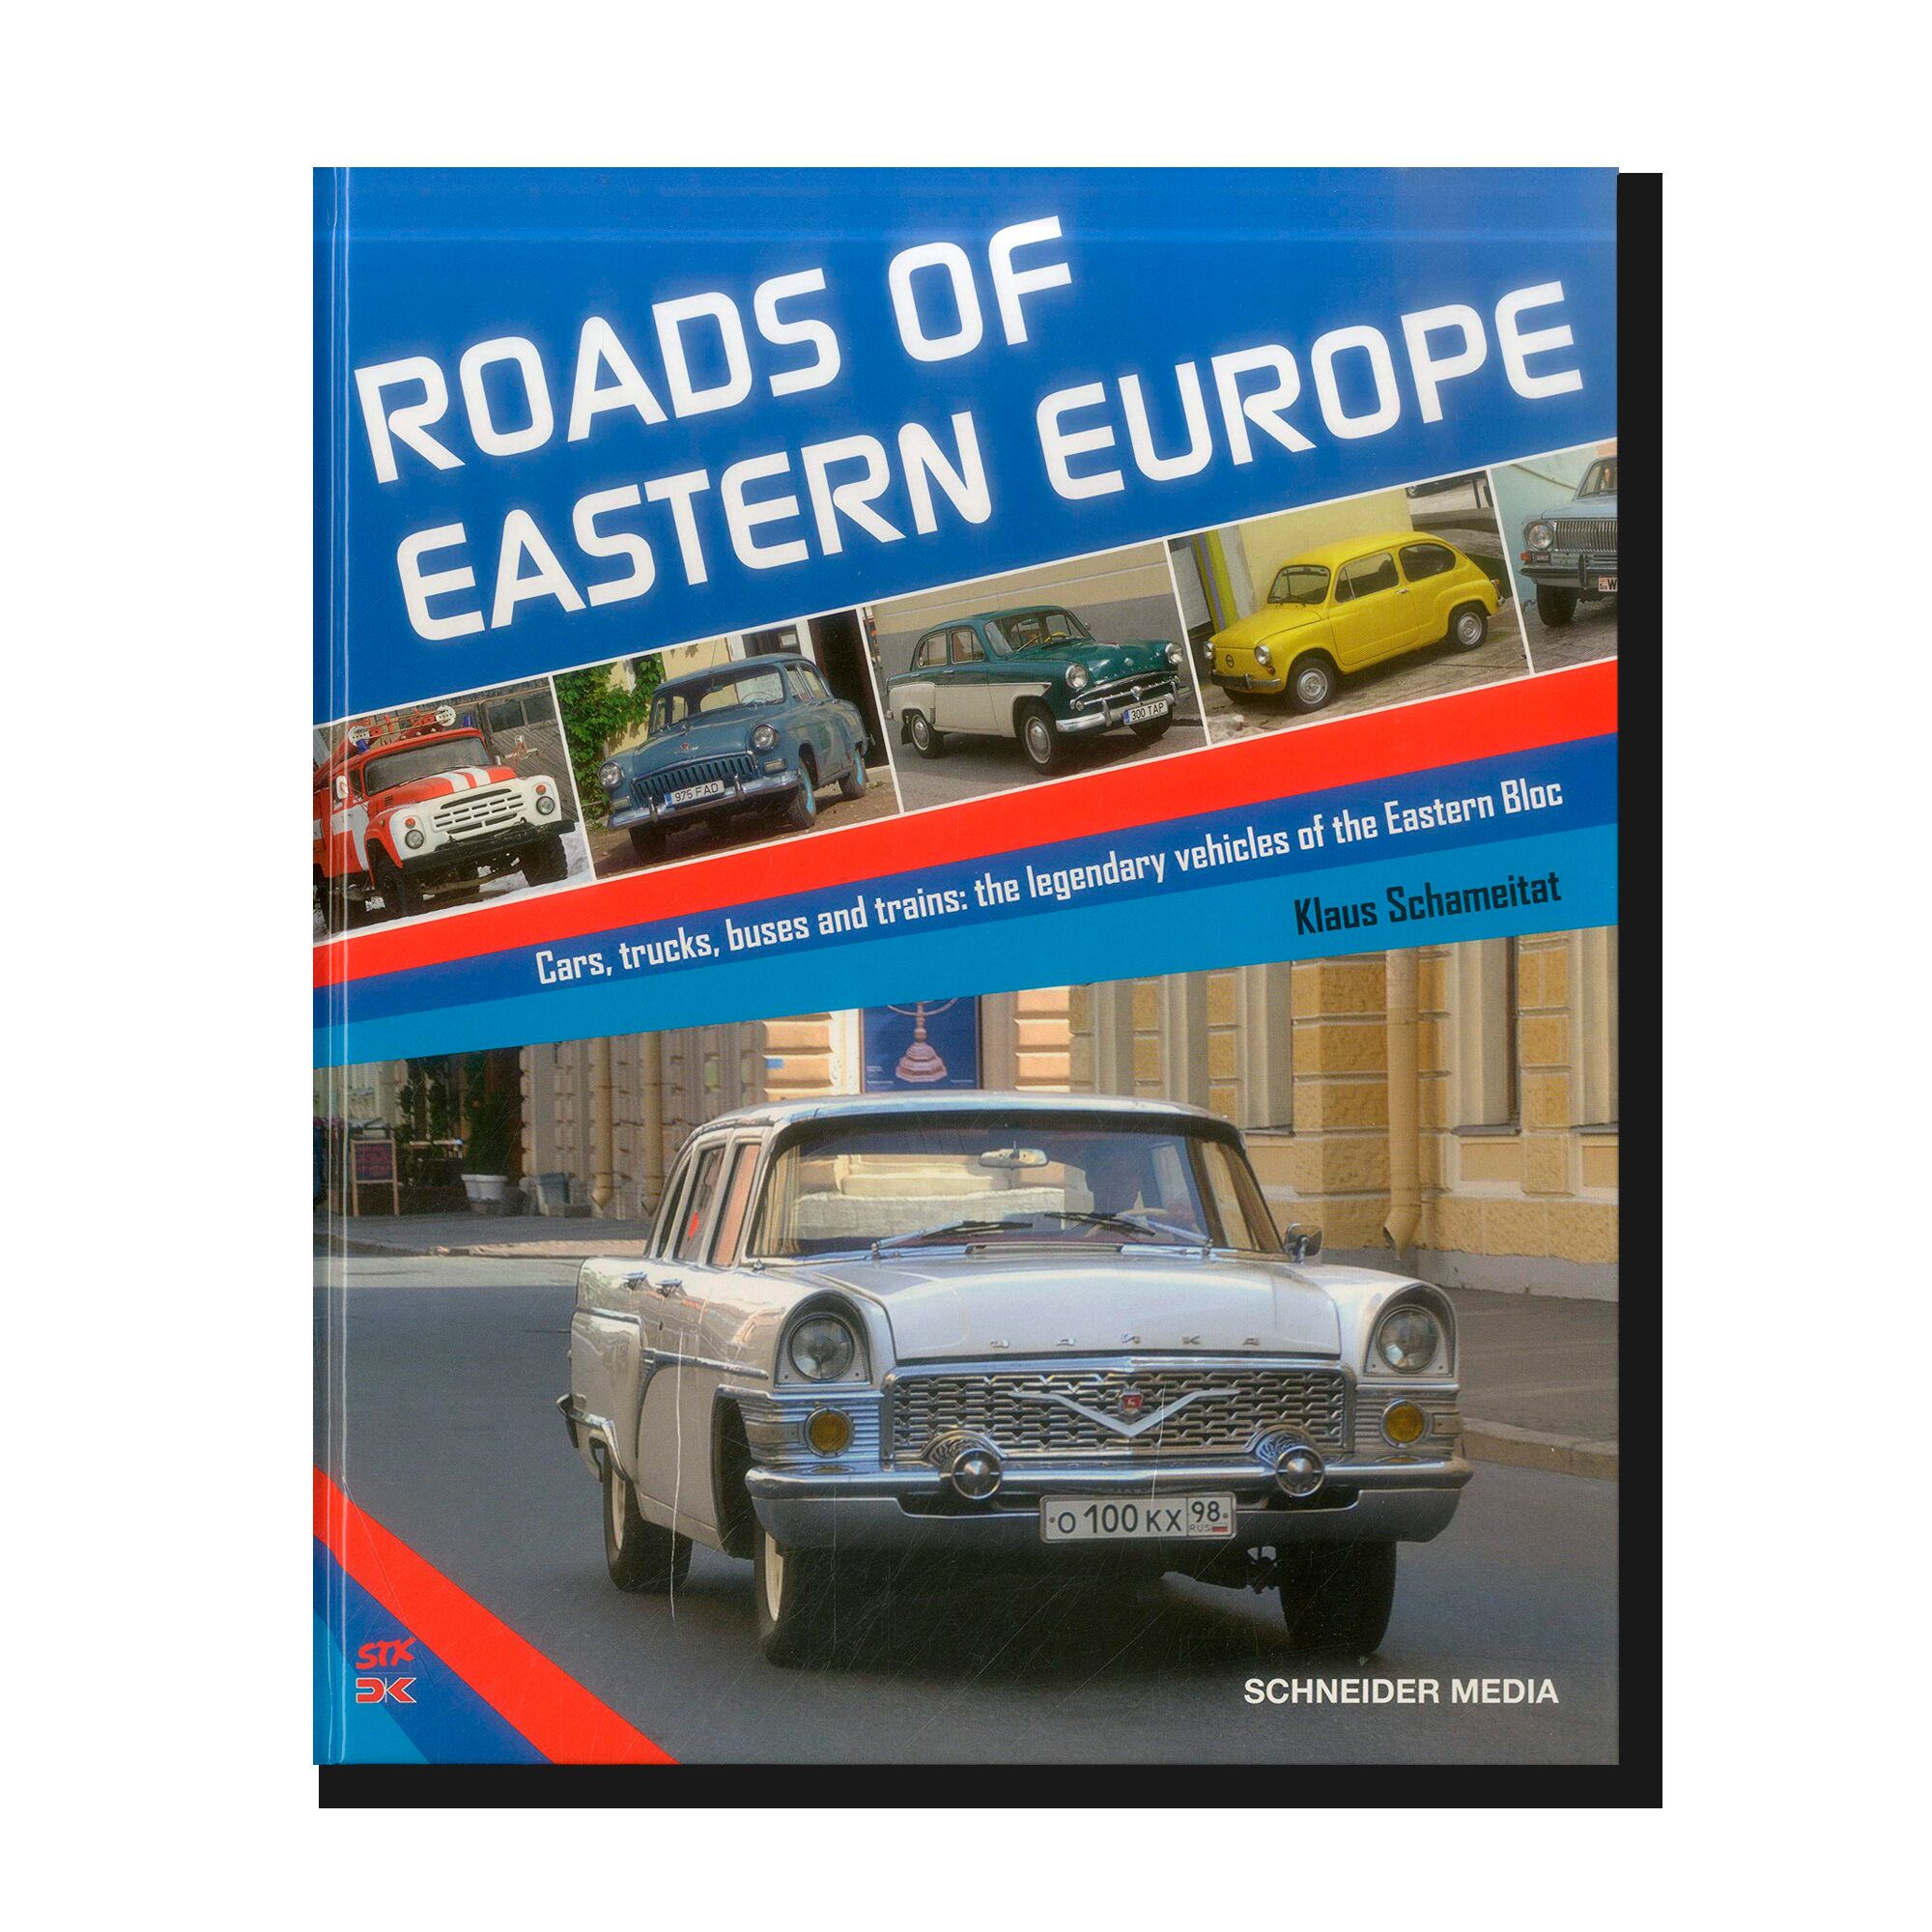 Roads of Eastern Europe: Cars, trucks, buses and trains: the legendary vehicles of the Eastern Bloc